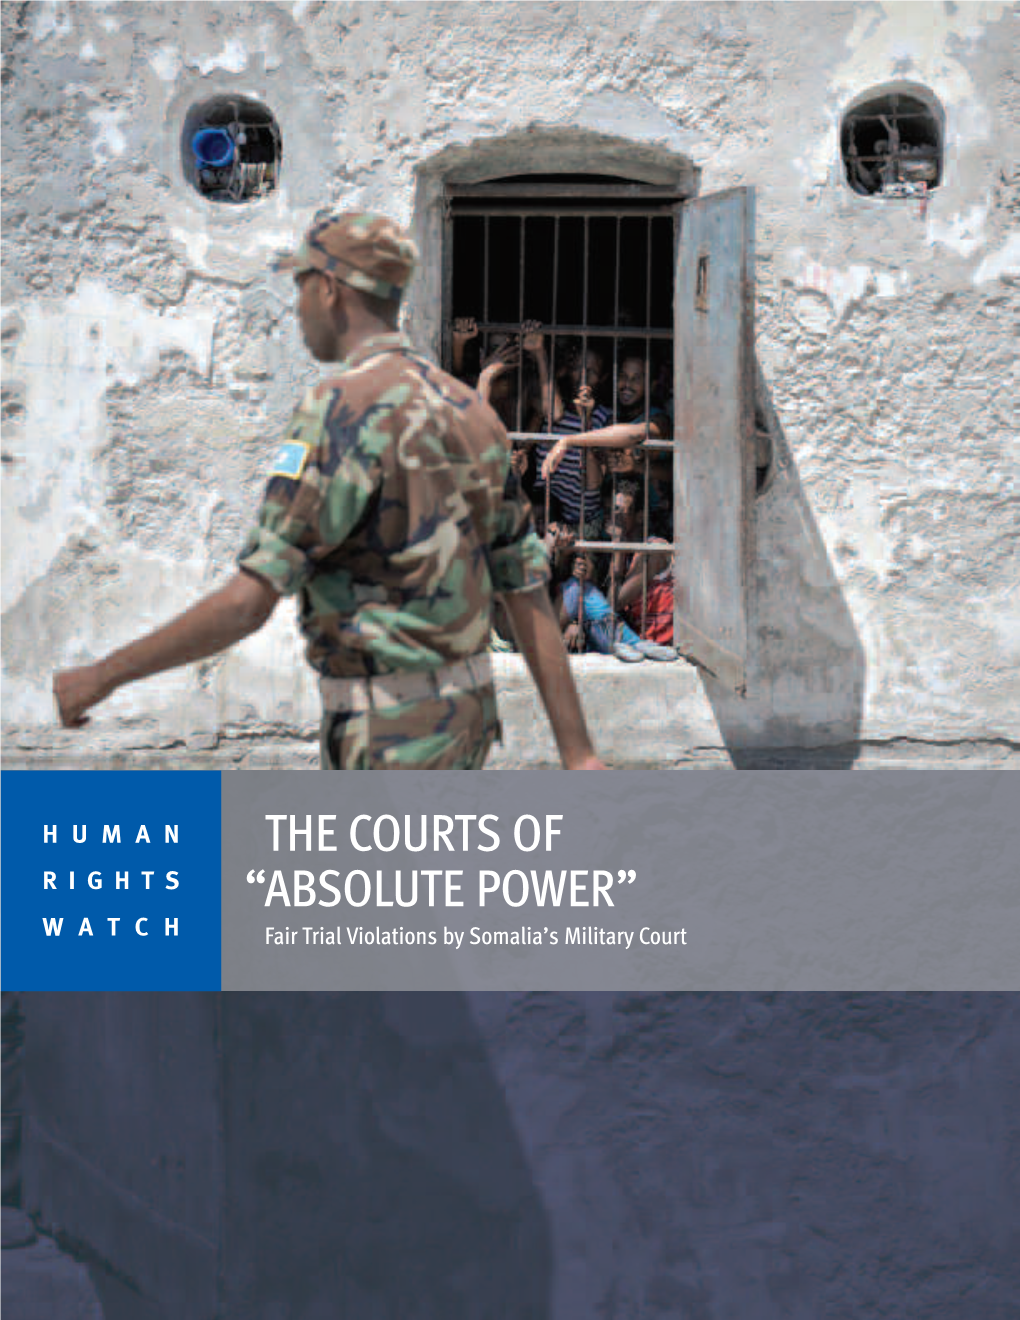 “Absolute Power”: Fair Trial Violations by Somalia's Military Court